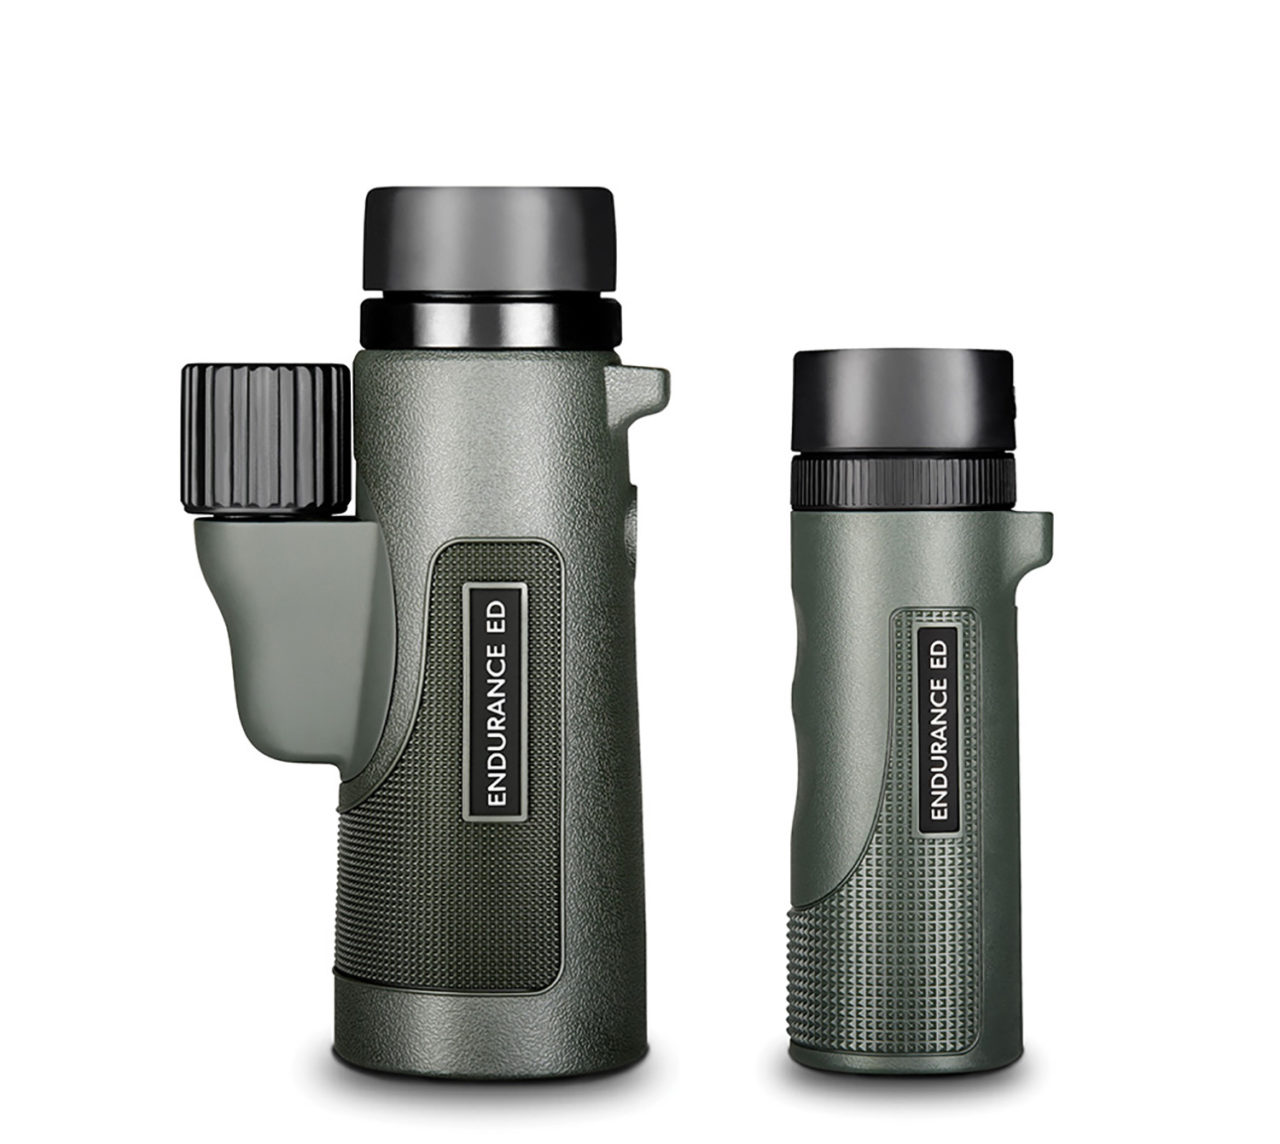 HAWKE® OPTICS’ NEW MONOCULARS ARE THE ONE CLEAR CHOICE